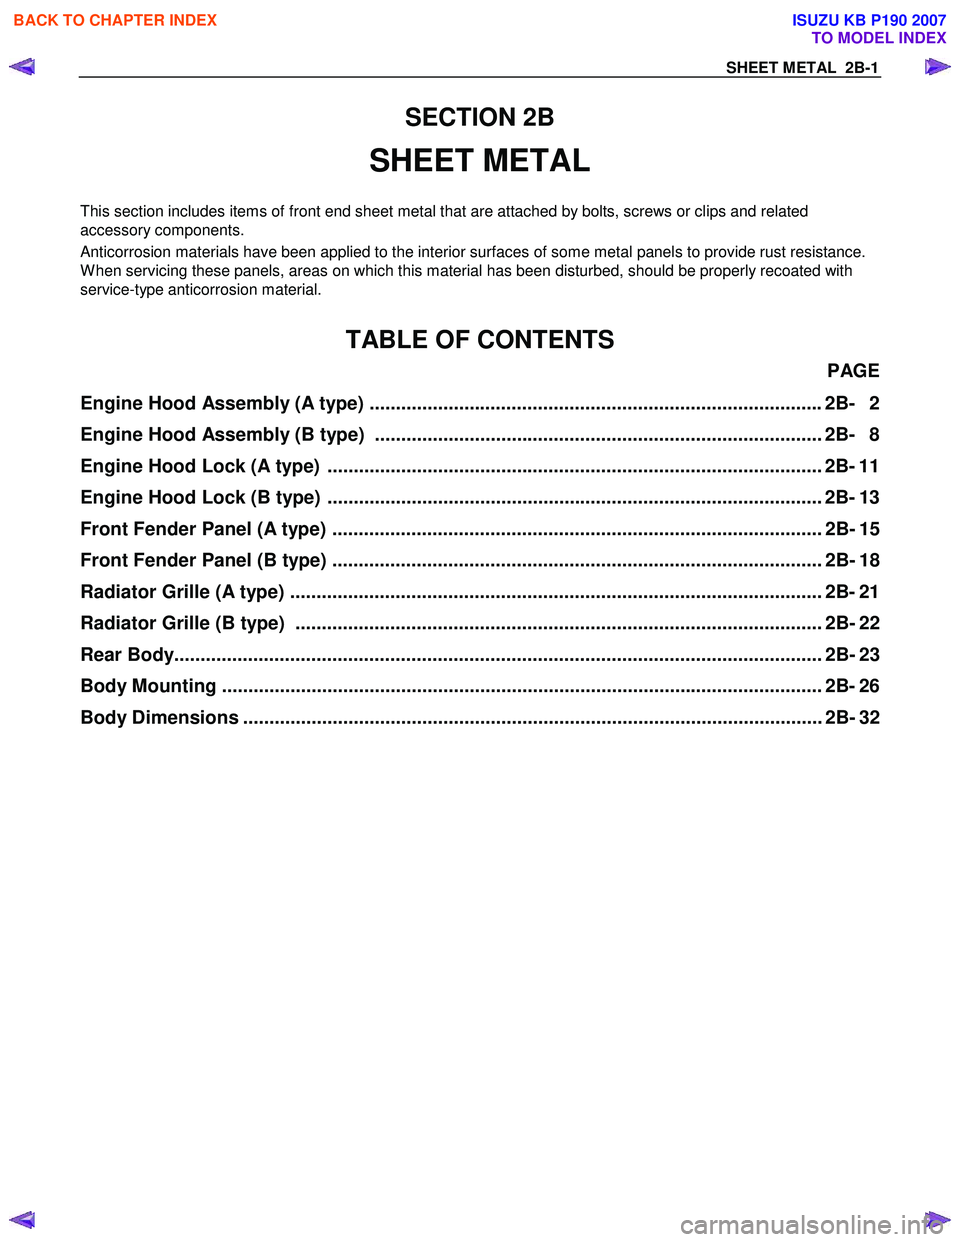 ISUZU KB P190 2007  Workshop Repair Manual SHEET METAL  2B-1 
SECTION 2B 
SHEET METAL 
  
This section includes items of front end sheet metal that are attached by bolts, screws or clips and related  
accessory components.  
Anticorrosion mate